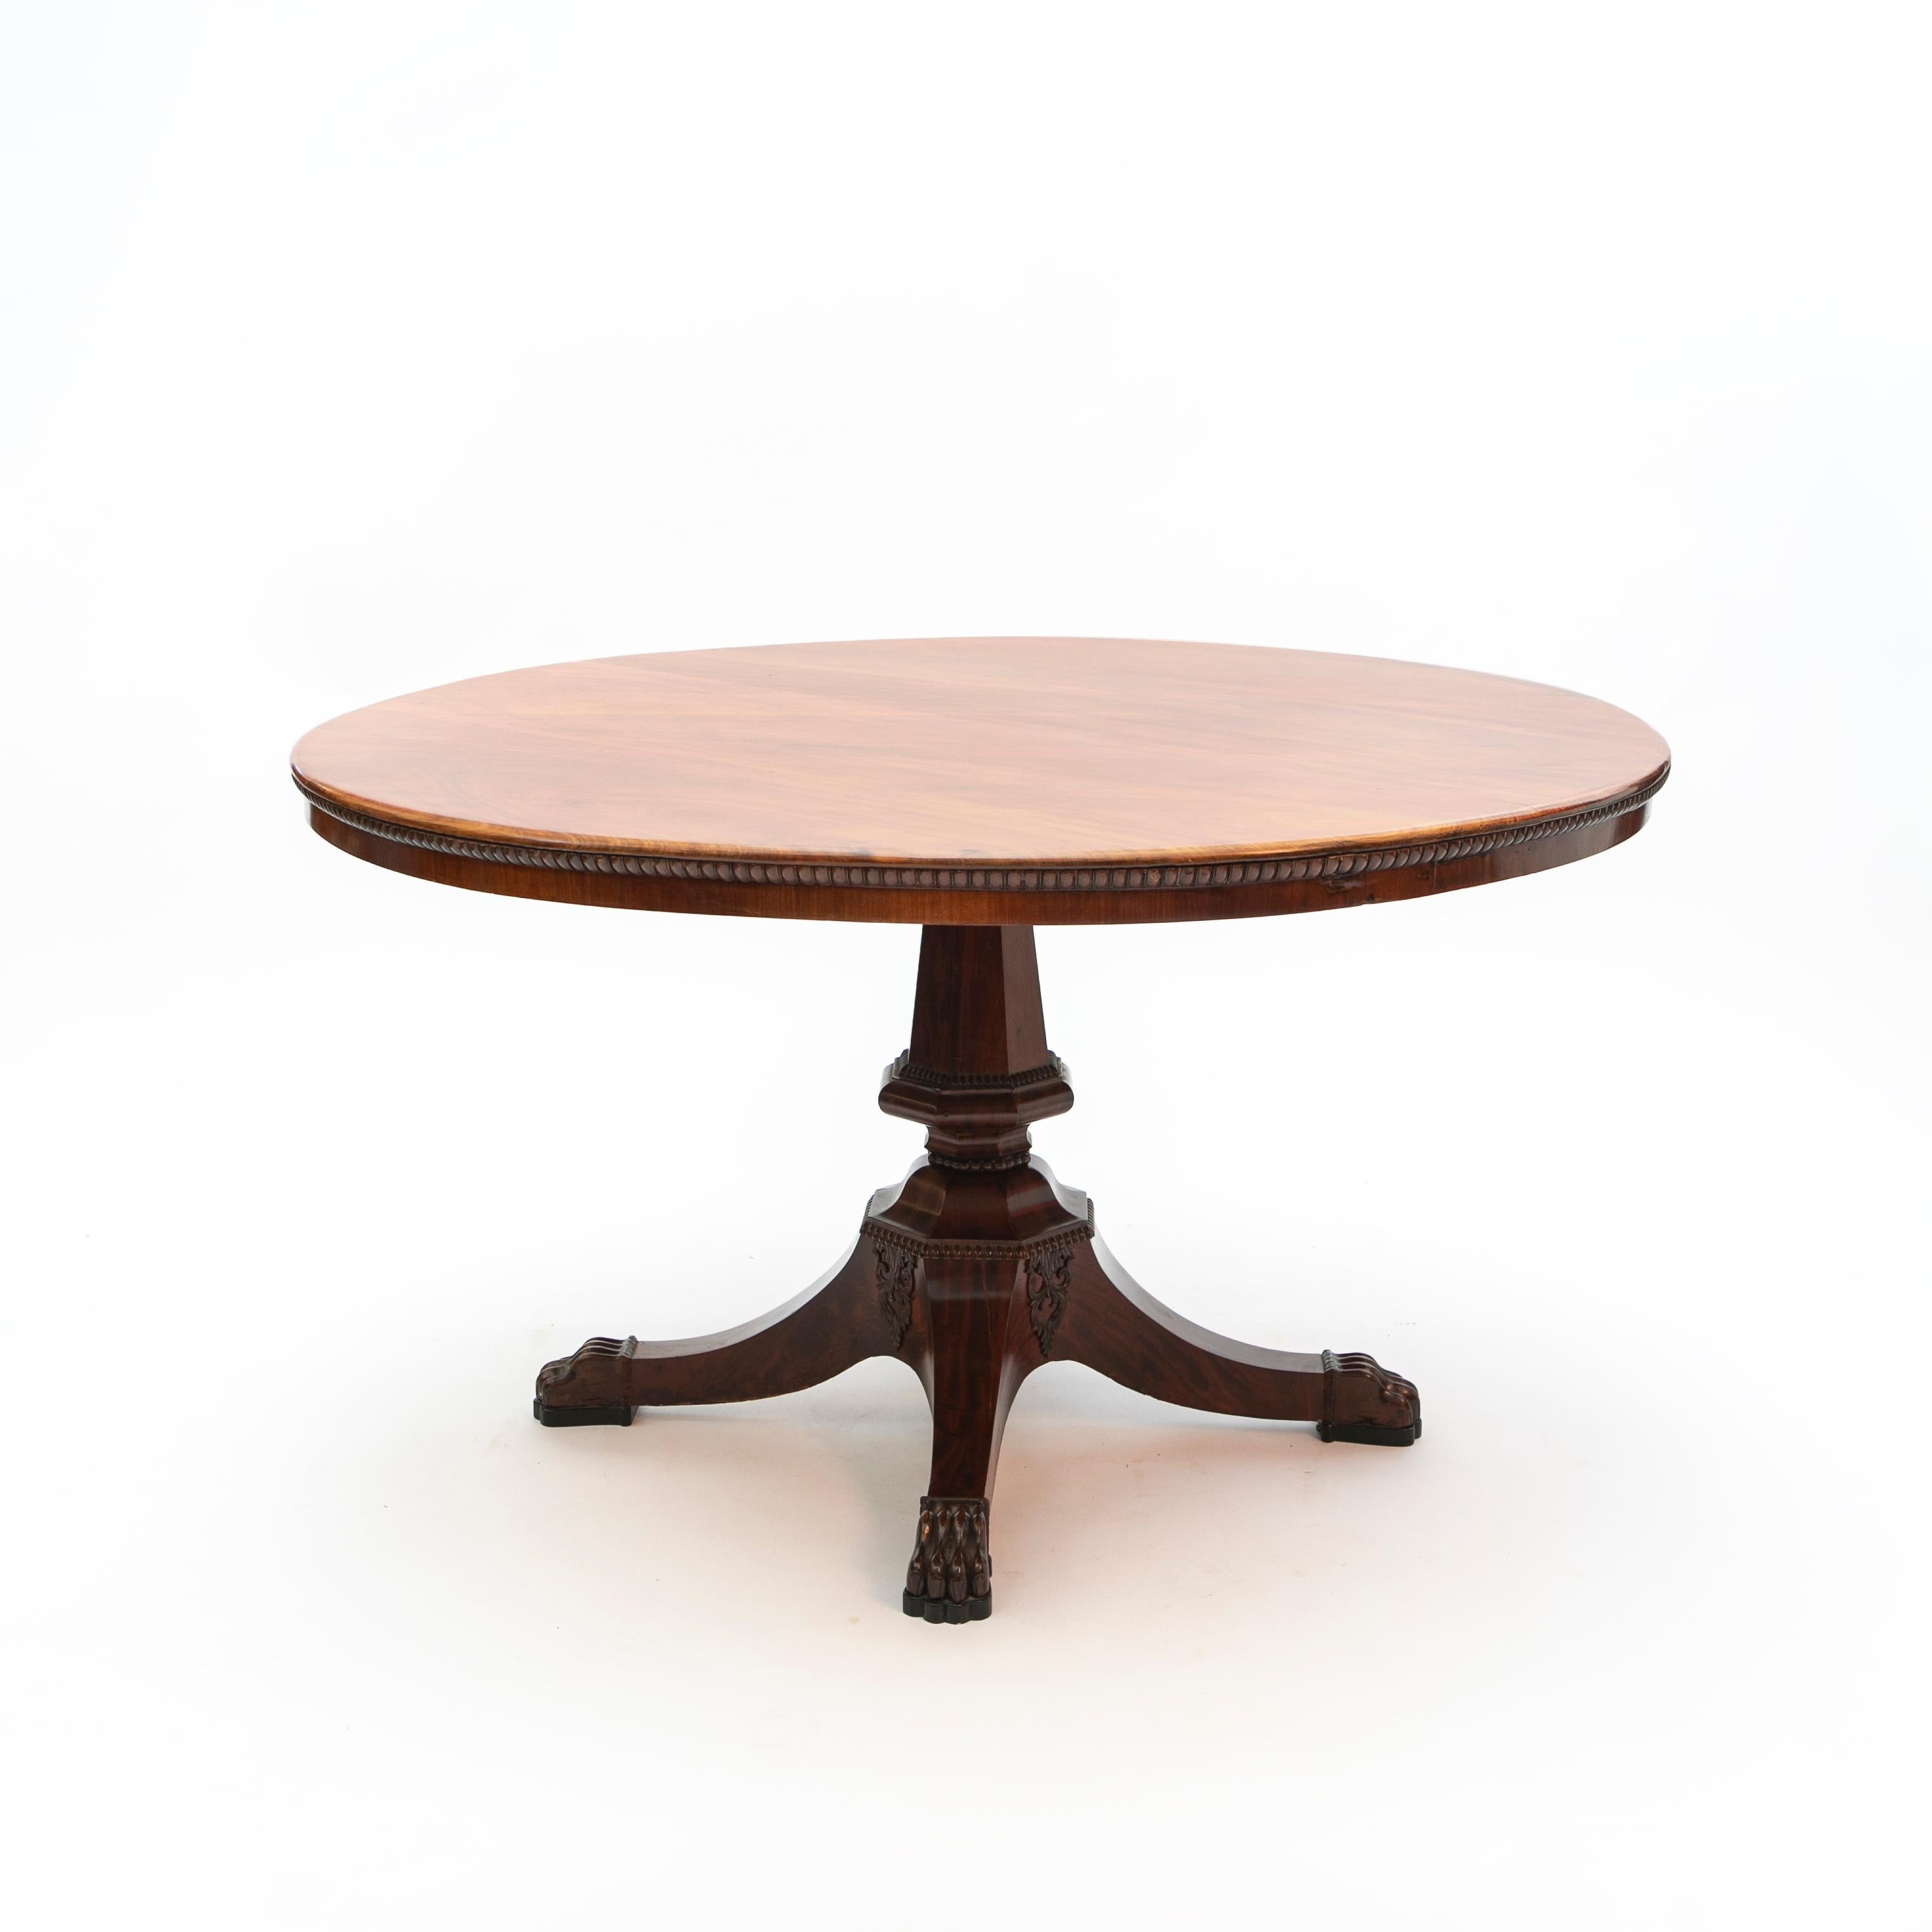 Early 19th century Danish empire / biedemeier mahogany center table.
Large circular top with beaded table apron and a hexagonal shaped column support ending on carved lion’s paw feet.

Copenhagen, Denmark 1820-1830

(Table can be disassembled